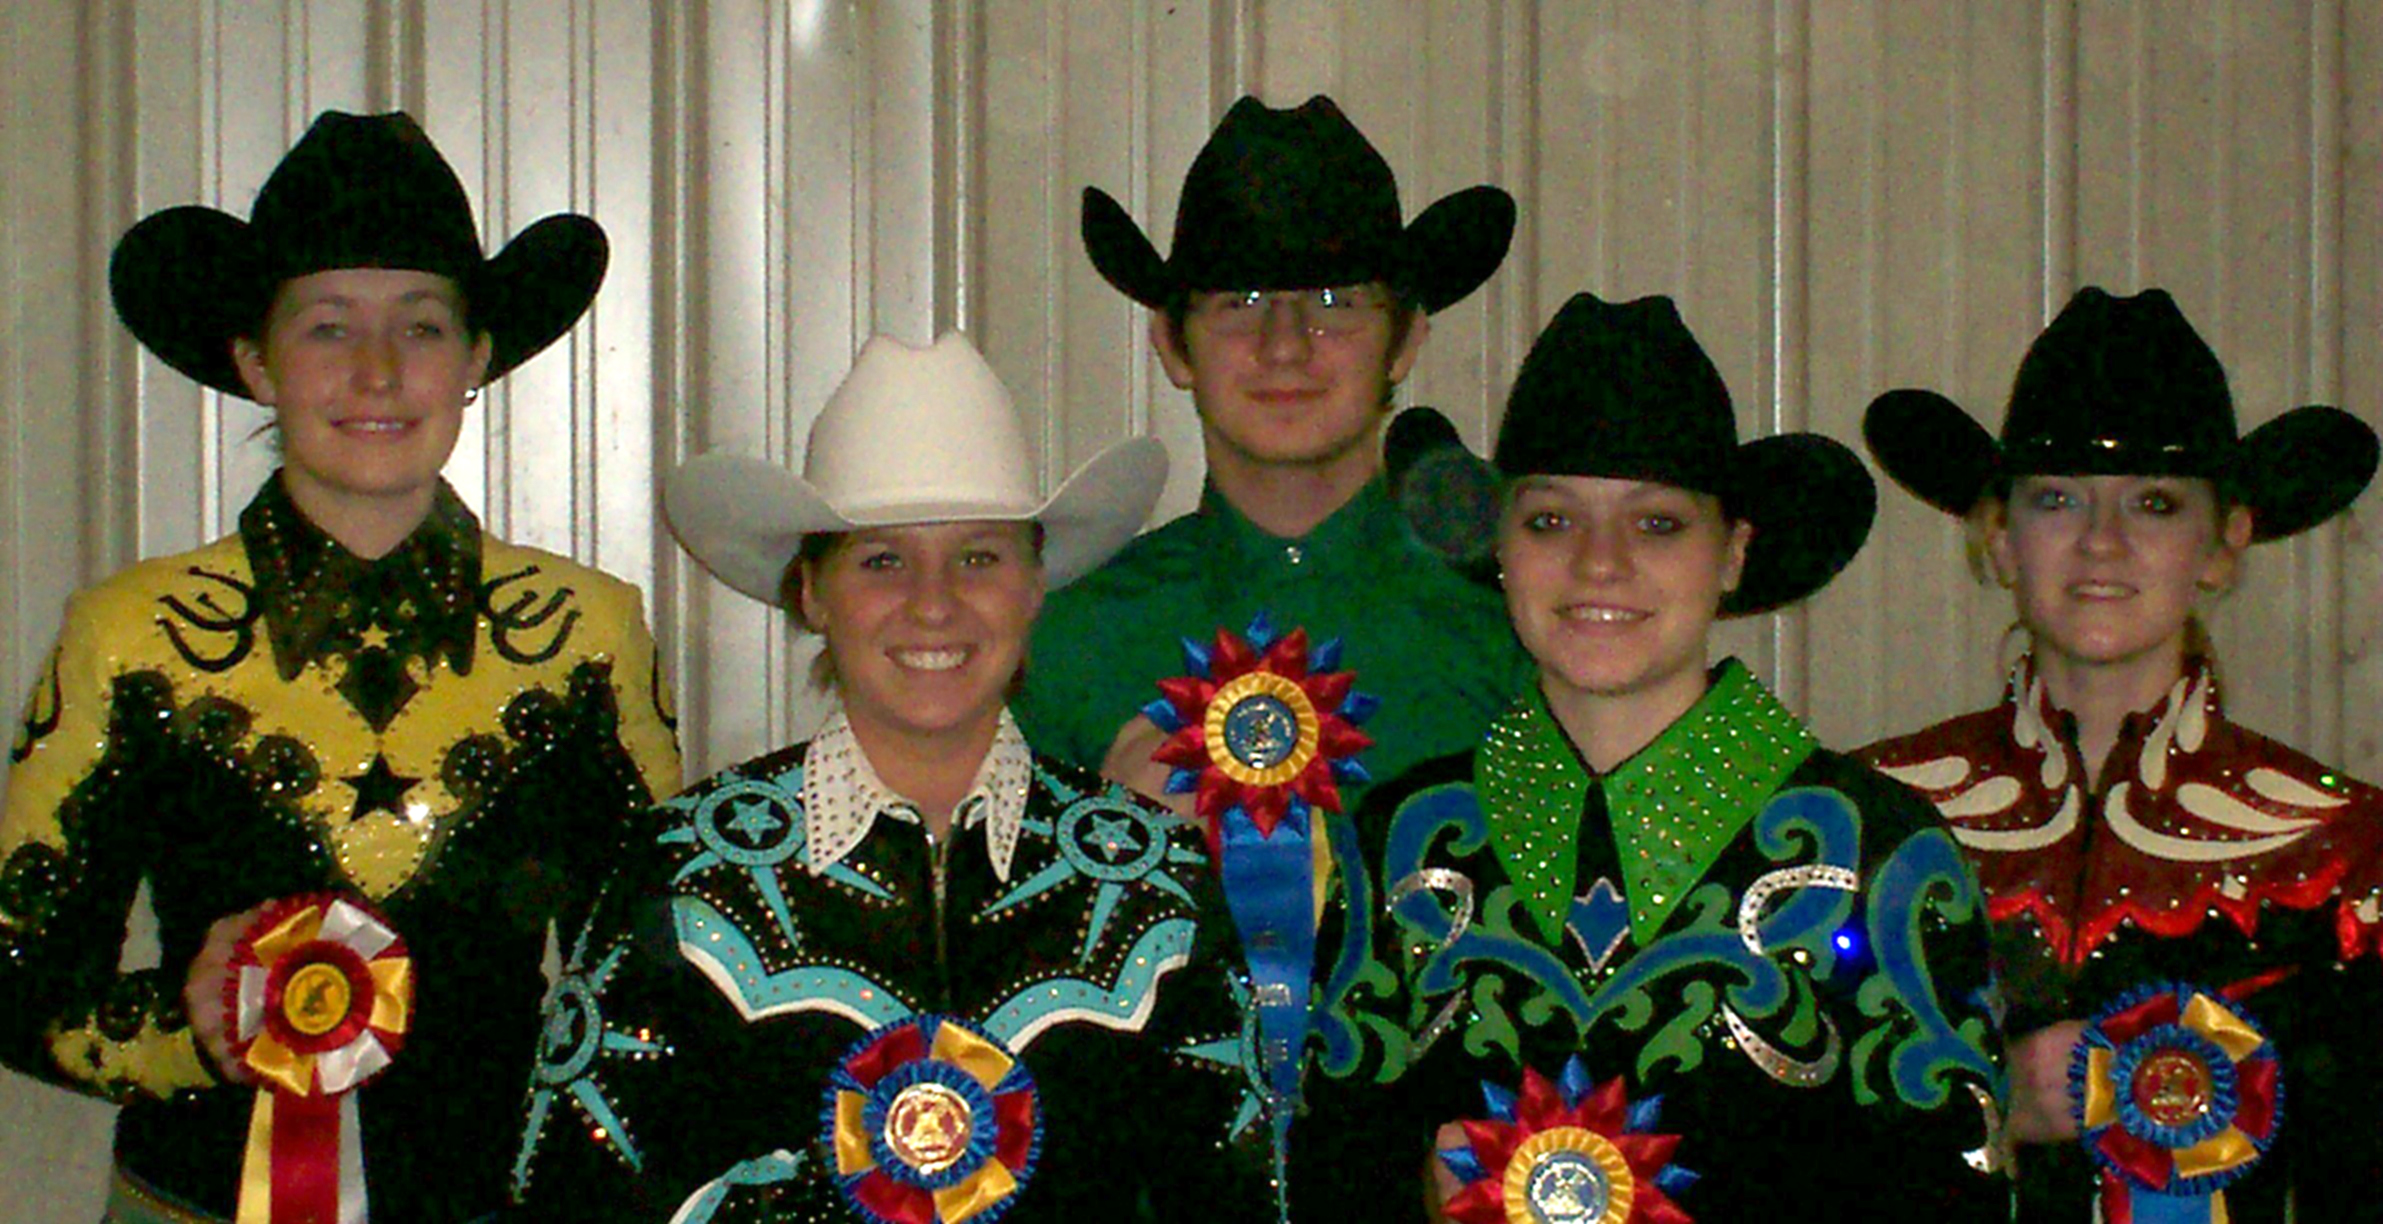 Members of NDSU's horse show team show off their ribbons from regional competition in River Falls, Wis. The team members are, from left: Chelsea Sazama, Janelle Lanoue, Jordan Schultz, Shannon Voges and Jackie Eldredge.